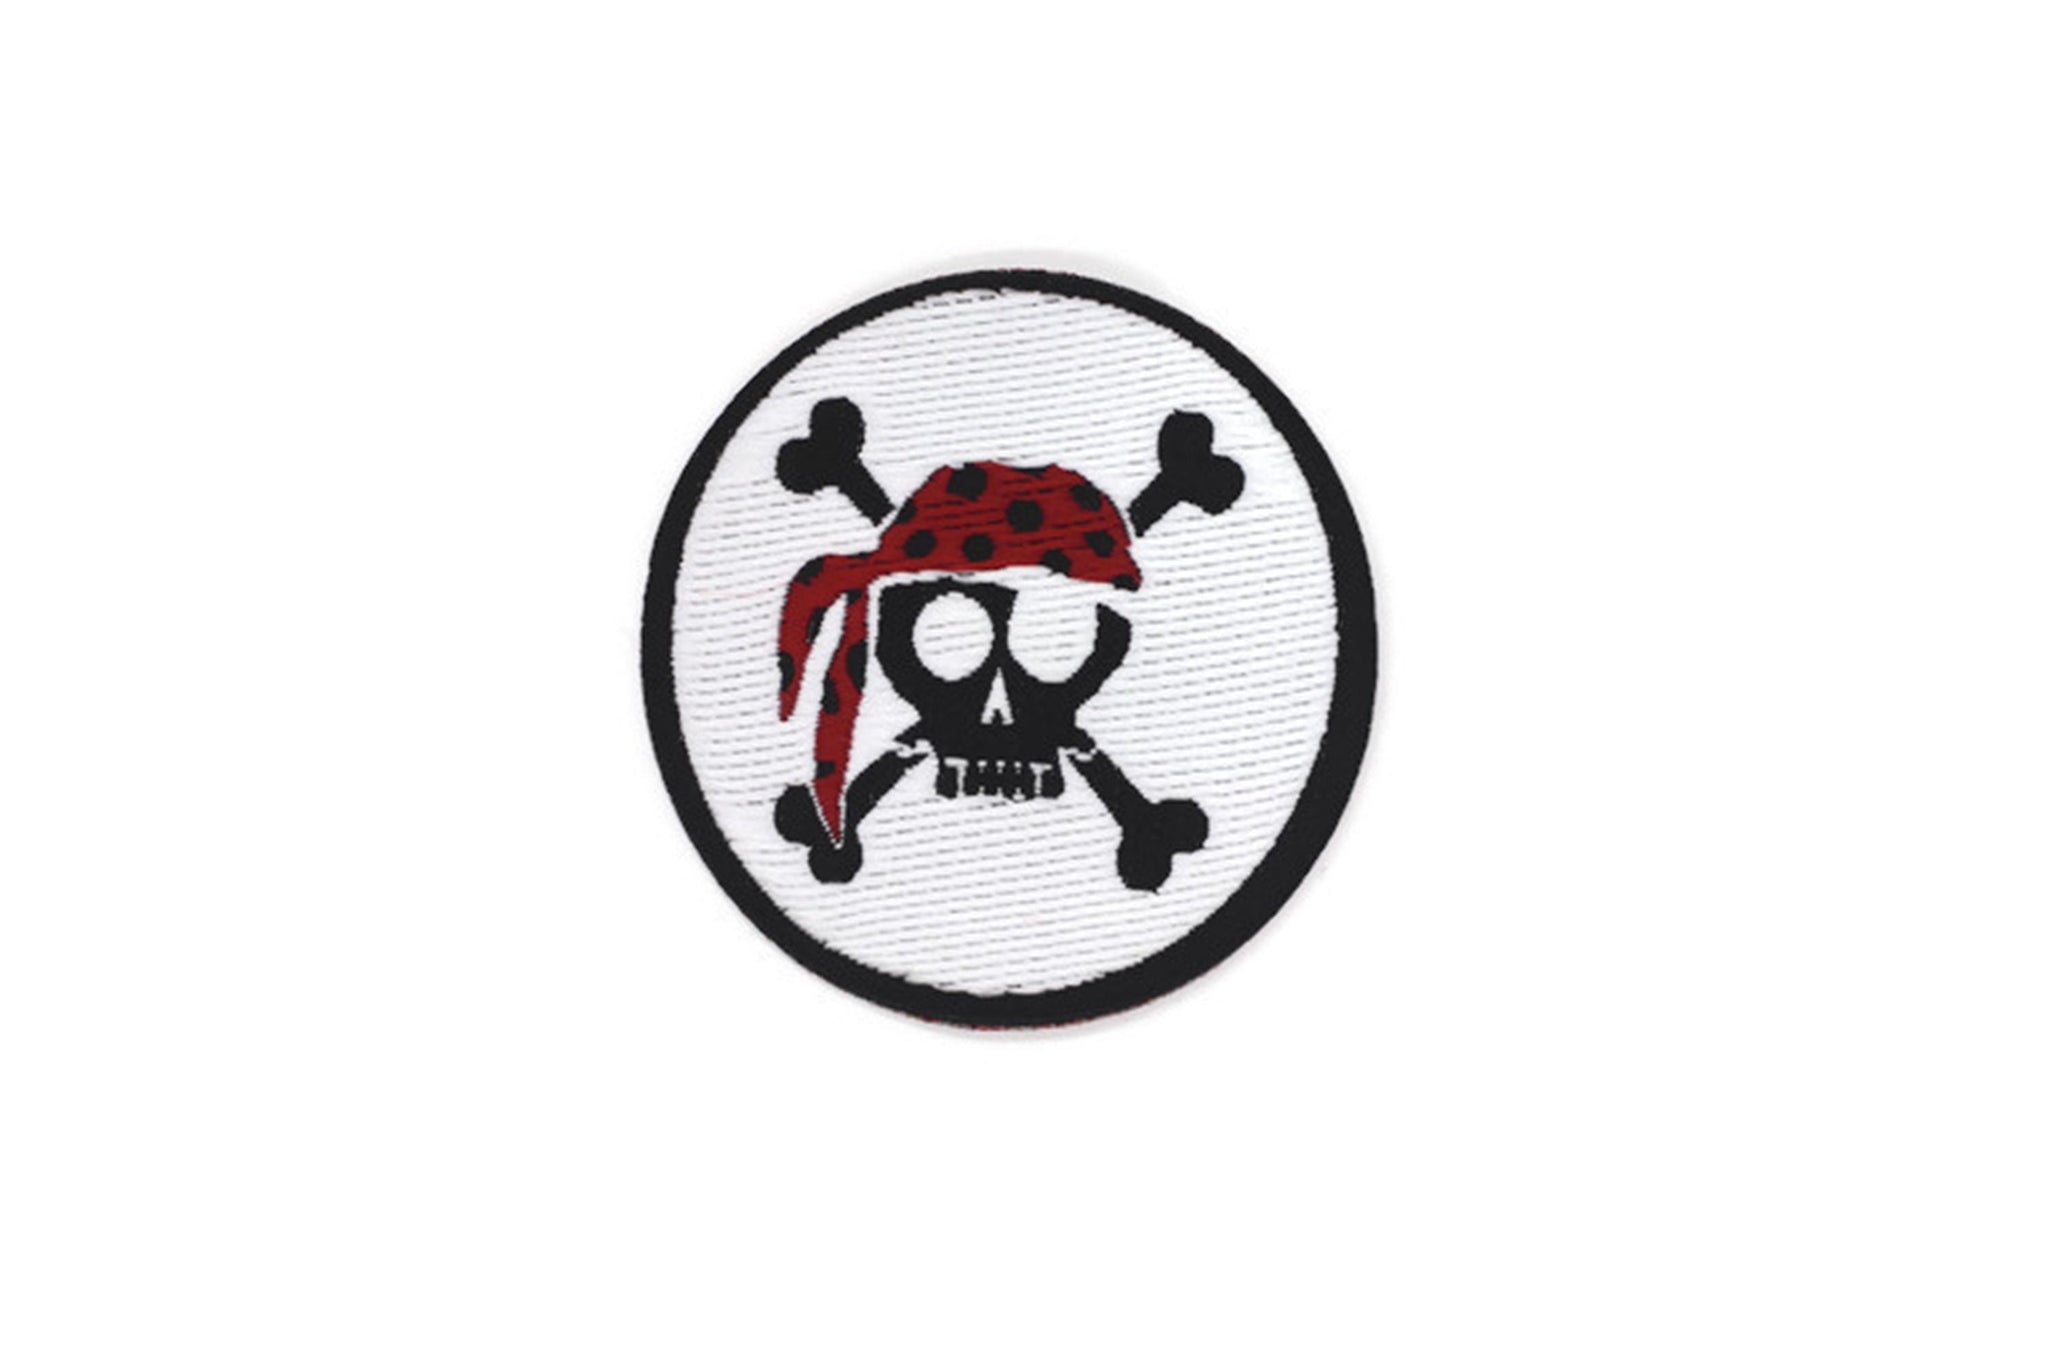 Pirate Skull Patch 2 Inch Iron On Patch Embroidery, Custom Patch, High Quality Sew On Badge for Denim, Sew On Patch, Applique